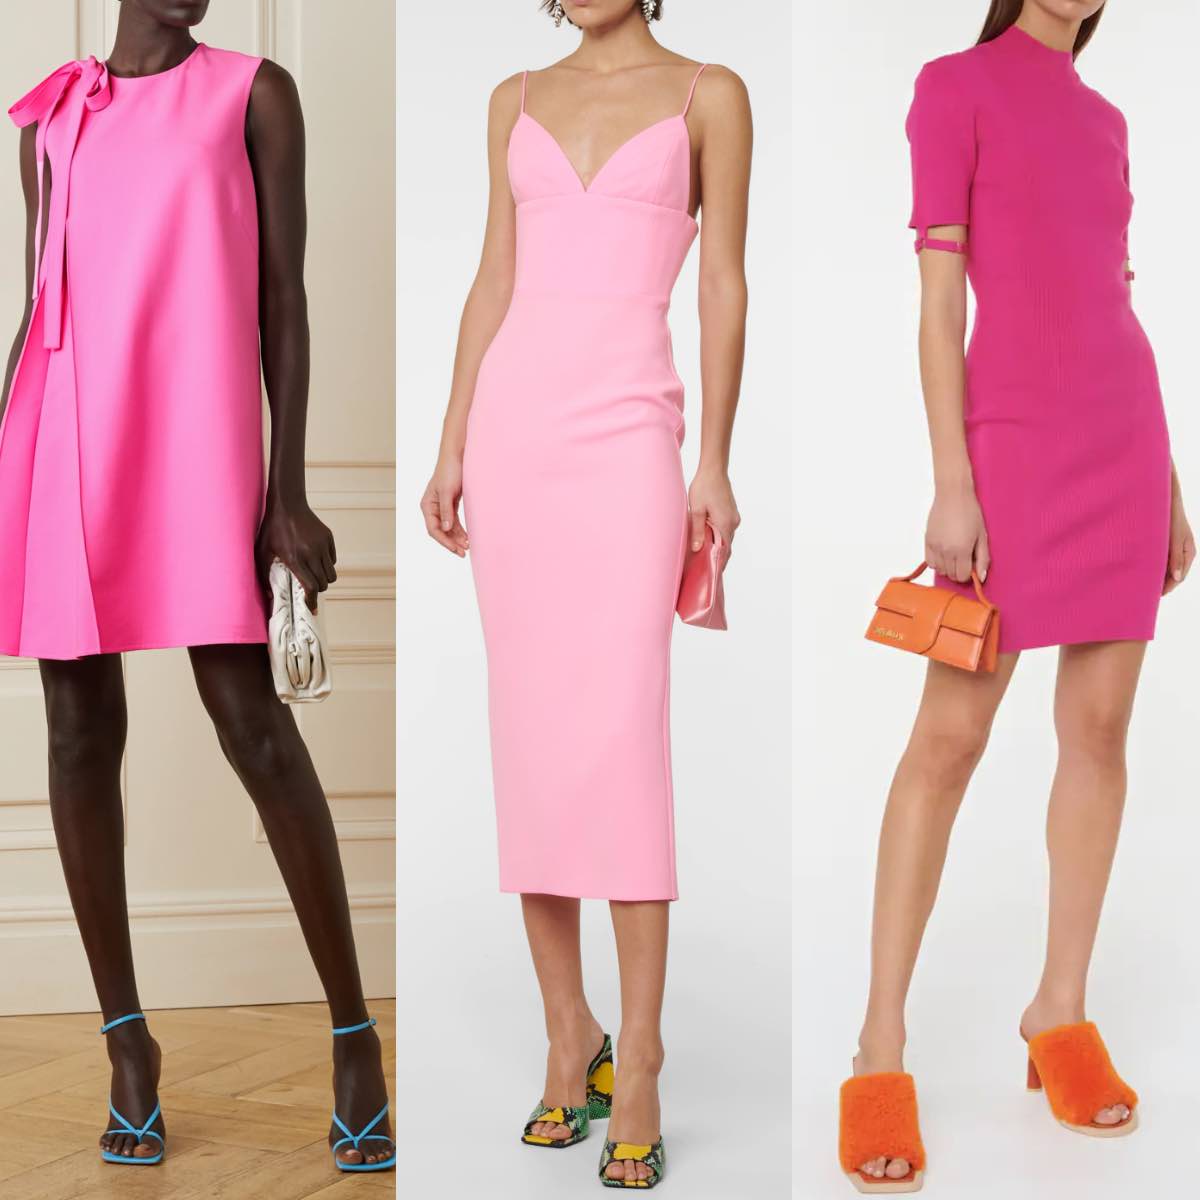 What color shoes to wear with pink dress colorful heels